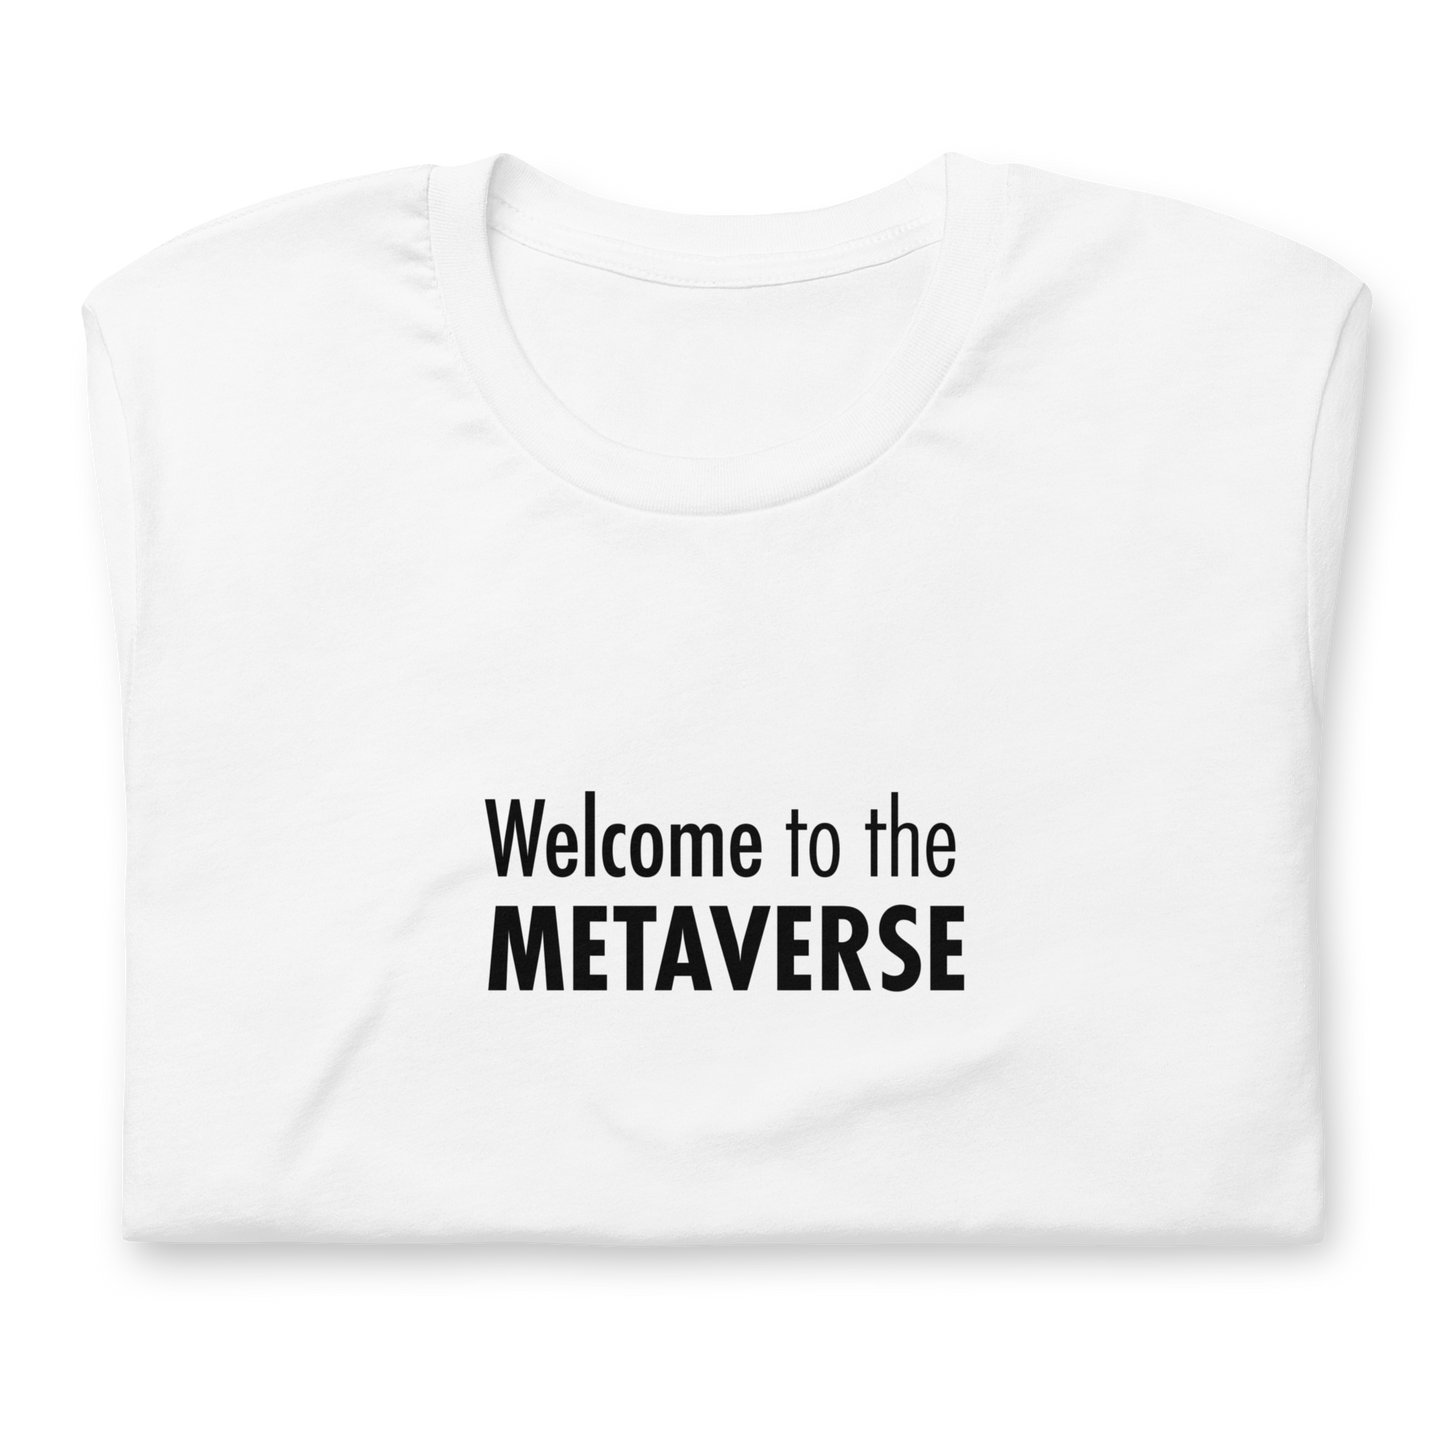 Welcome to the Metaverse Tee